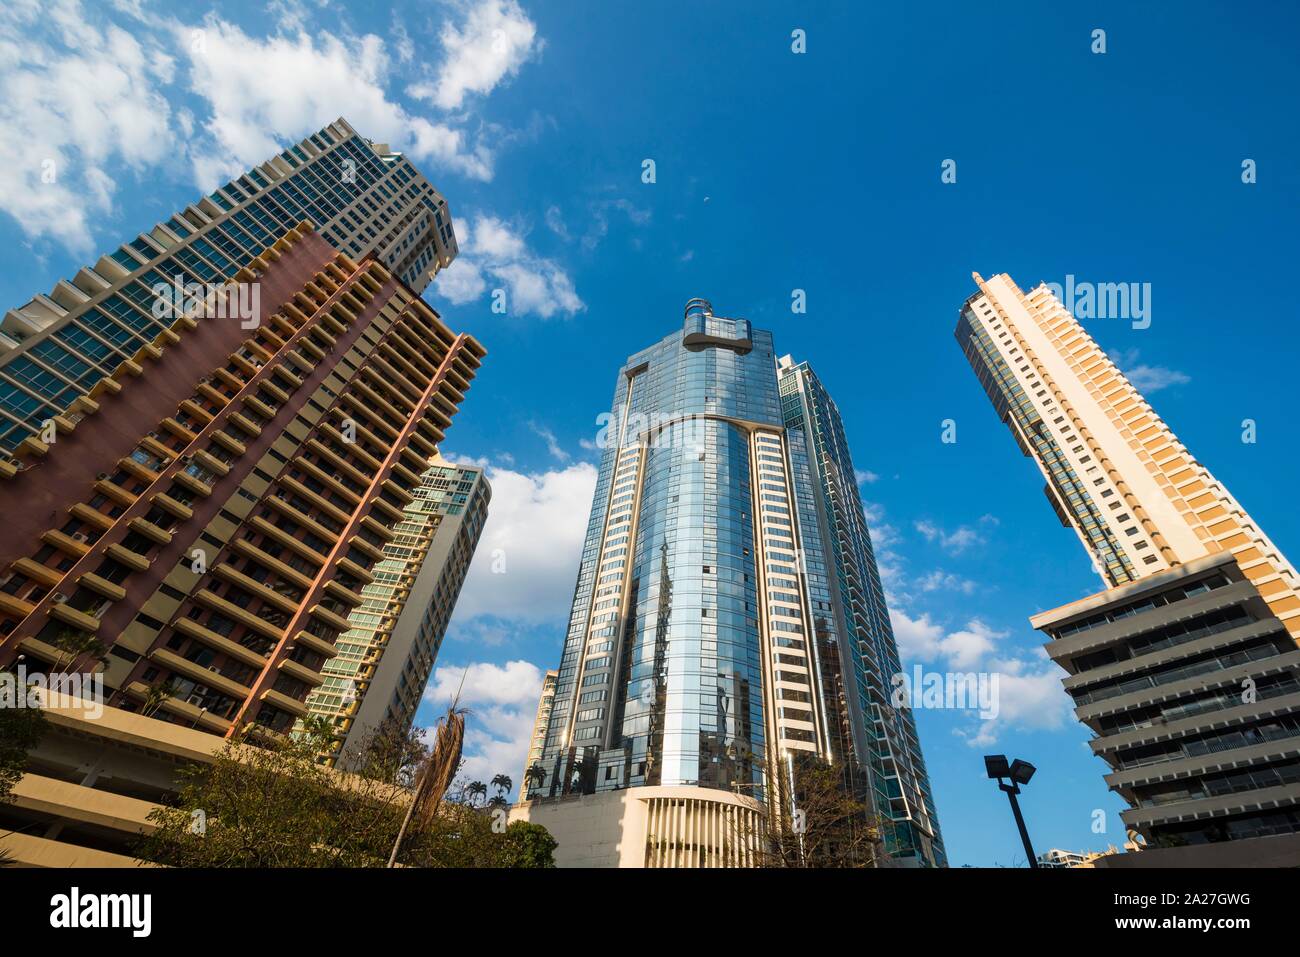 High rise buildings in the center of Panama City, Panama Stock Photo